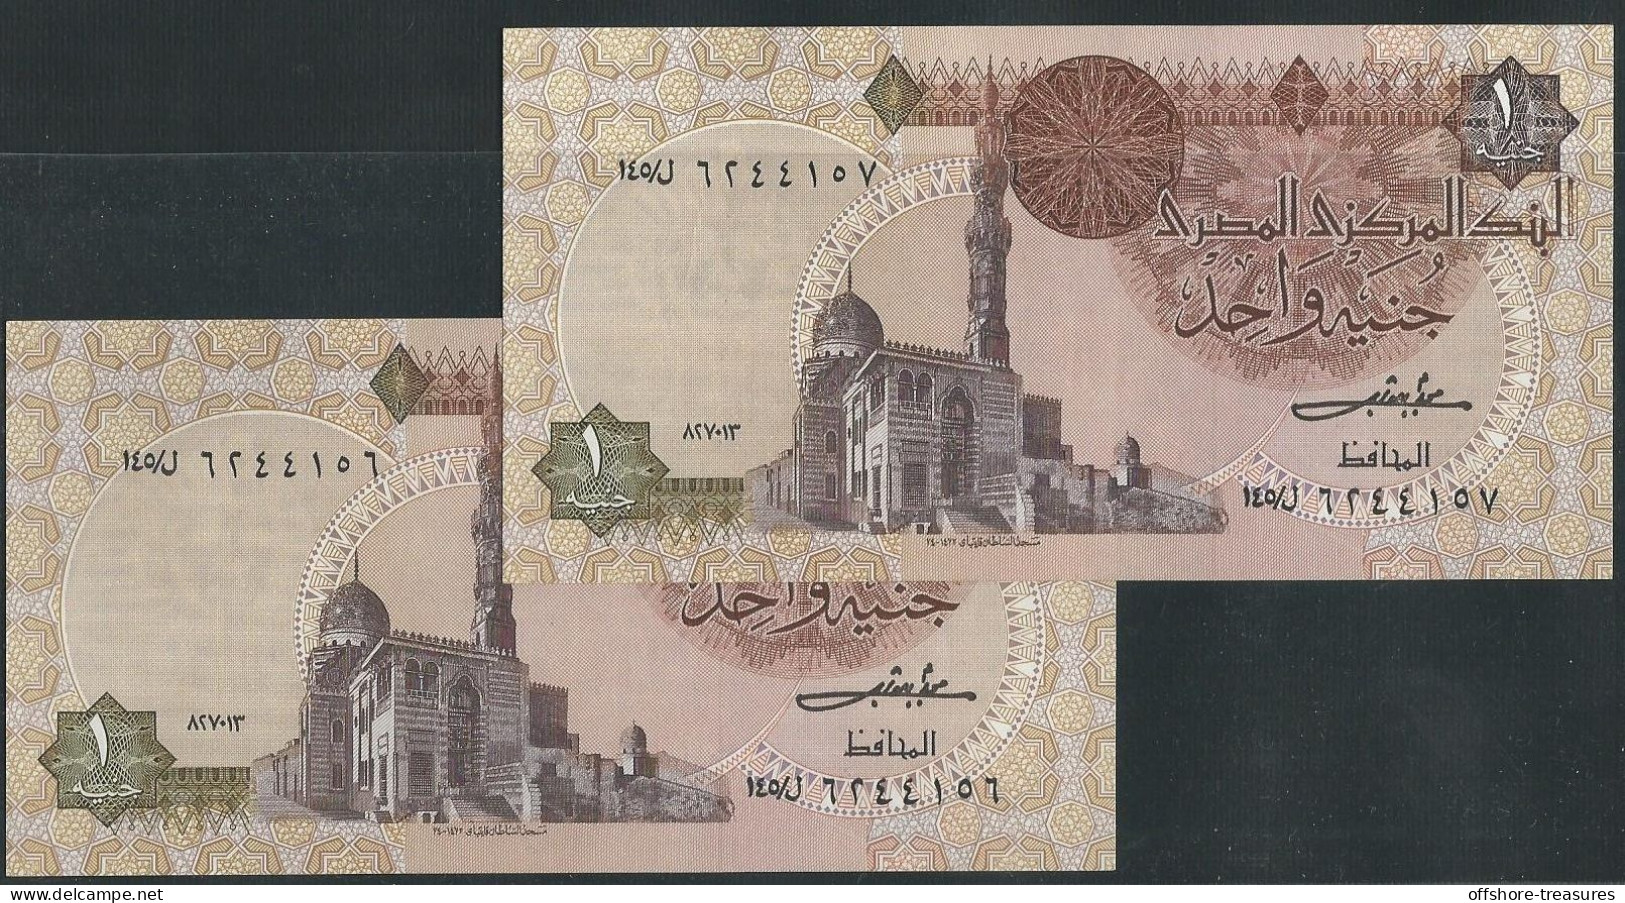 Egypt Central Bank 2 X 1 Pound Consecutive Serial P#50b - Sign #16 Governor Shalaby UNC - Algérie